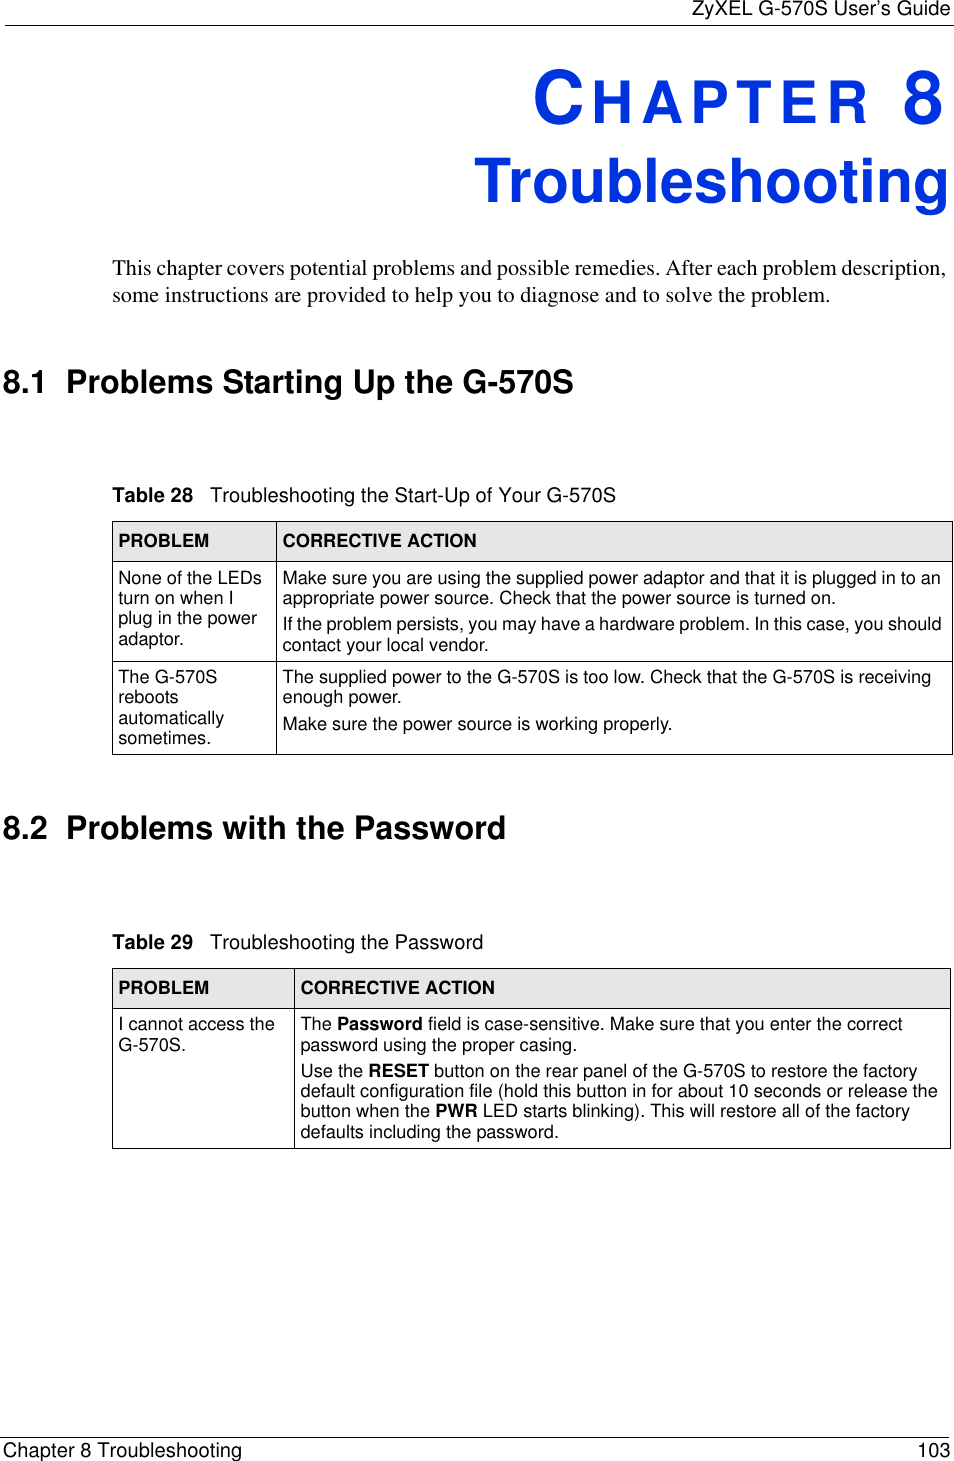 ZyXEL G-570S User’s GuideChapter 8 Troubleshooting 103CHAPTER 8TroubleshootingThis chapter covers potential problems and possible remedies. After each problem description, some instructions are provided to help you to diagnose and to solve the problem.8.1  Problems Starting Up the G-570S8.2  Problems with the PasswordTable 28   Troubleshooting the Start-Up of Your G-570SPROBLEM CORRECTIVE ACTIONNone of the LEDs turn on when I plug in the power adaptor.Make sure you are using the supplied power adaptor and that it is plugged in to an appropriate power source. Check that the power source is turned on. If the problem persists, you may have a hardware problem. In this case, you should contact your local vendor.The G-570S reboots automatically sometimes.The supplied power to the G-570S is too low. Check that the G-570S is receiving enough power.Make sure the power source is working properly.Table 29   Troubleshooting the PasswordPROBLEM CORRECTIVE ACTIONI cannot access the G-570S. The Password field is case-sensitive. Make sure that you enter the correct password using the proper casing.Use the RESET button on the rear panel of the G-570S to restore the factory default configuration file (hold this button in for about 10 seconds or release the button when the PWR LED starts blinking). This will restore all of the factory defaults including the password. 